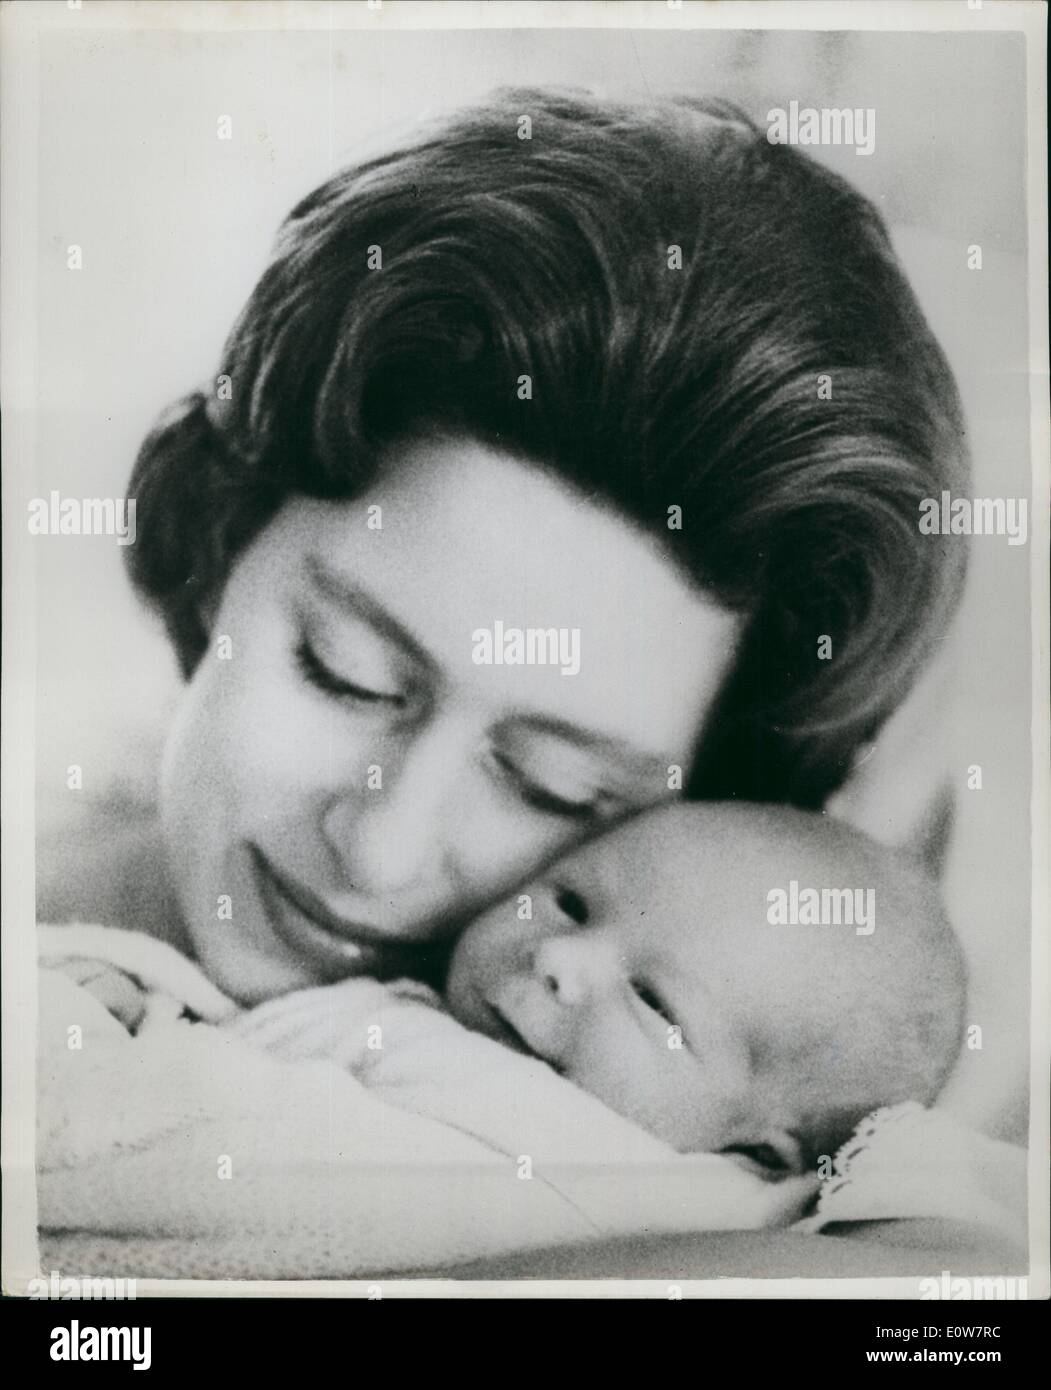 Nov. 11, 1961 - H.R.H. Princess Margaret And Her Baby Son: The first photographs of the baby son born to H.R.H. Princess Margaret - Countess of Snowdon -were taken by the baby's father - the Earl of Snowdon. they are being issued throughout the world - and it is expected that they will being in something like &pound;10,000 - and although no details have been given regarding fees to the Earl -it is believed that his share would be donated to charity. The Earl gave up his career as a photographer when he married the princess Stock Photo